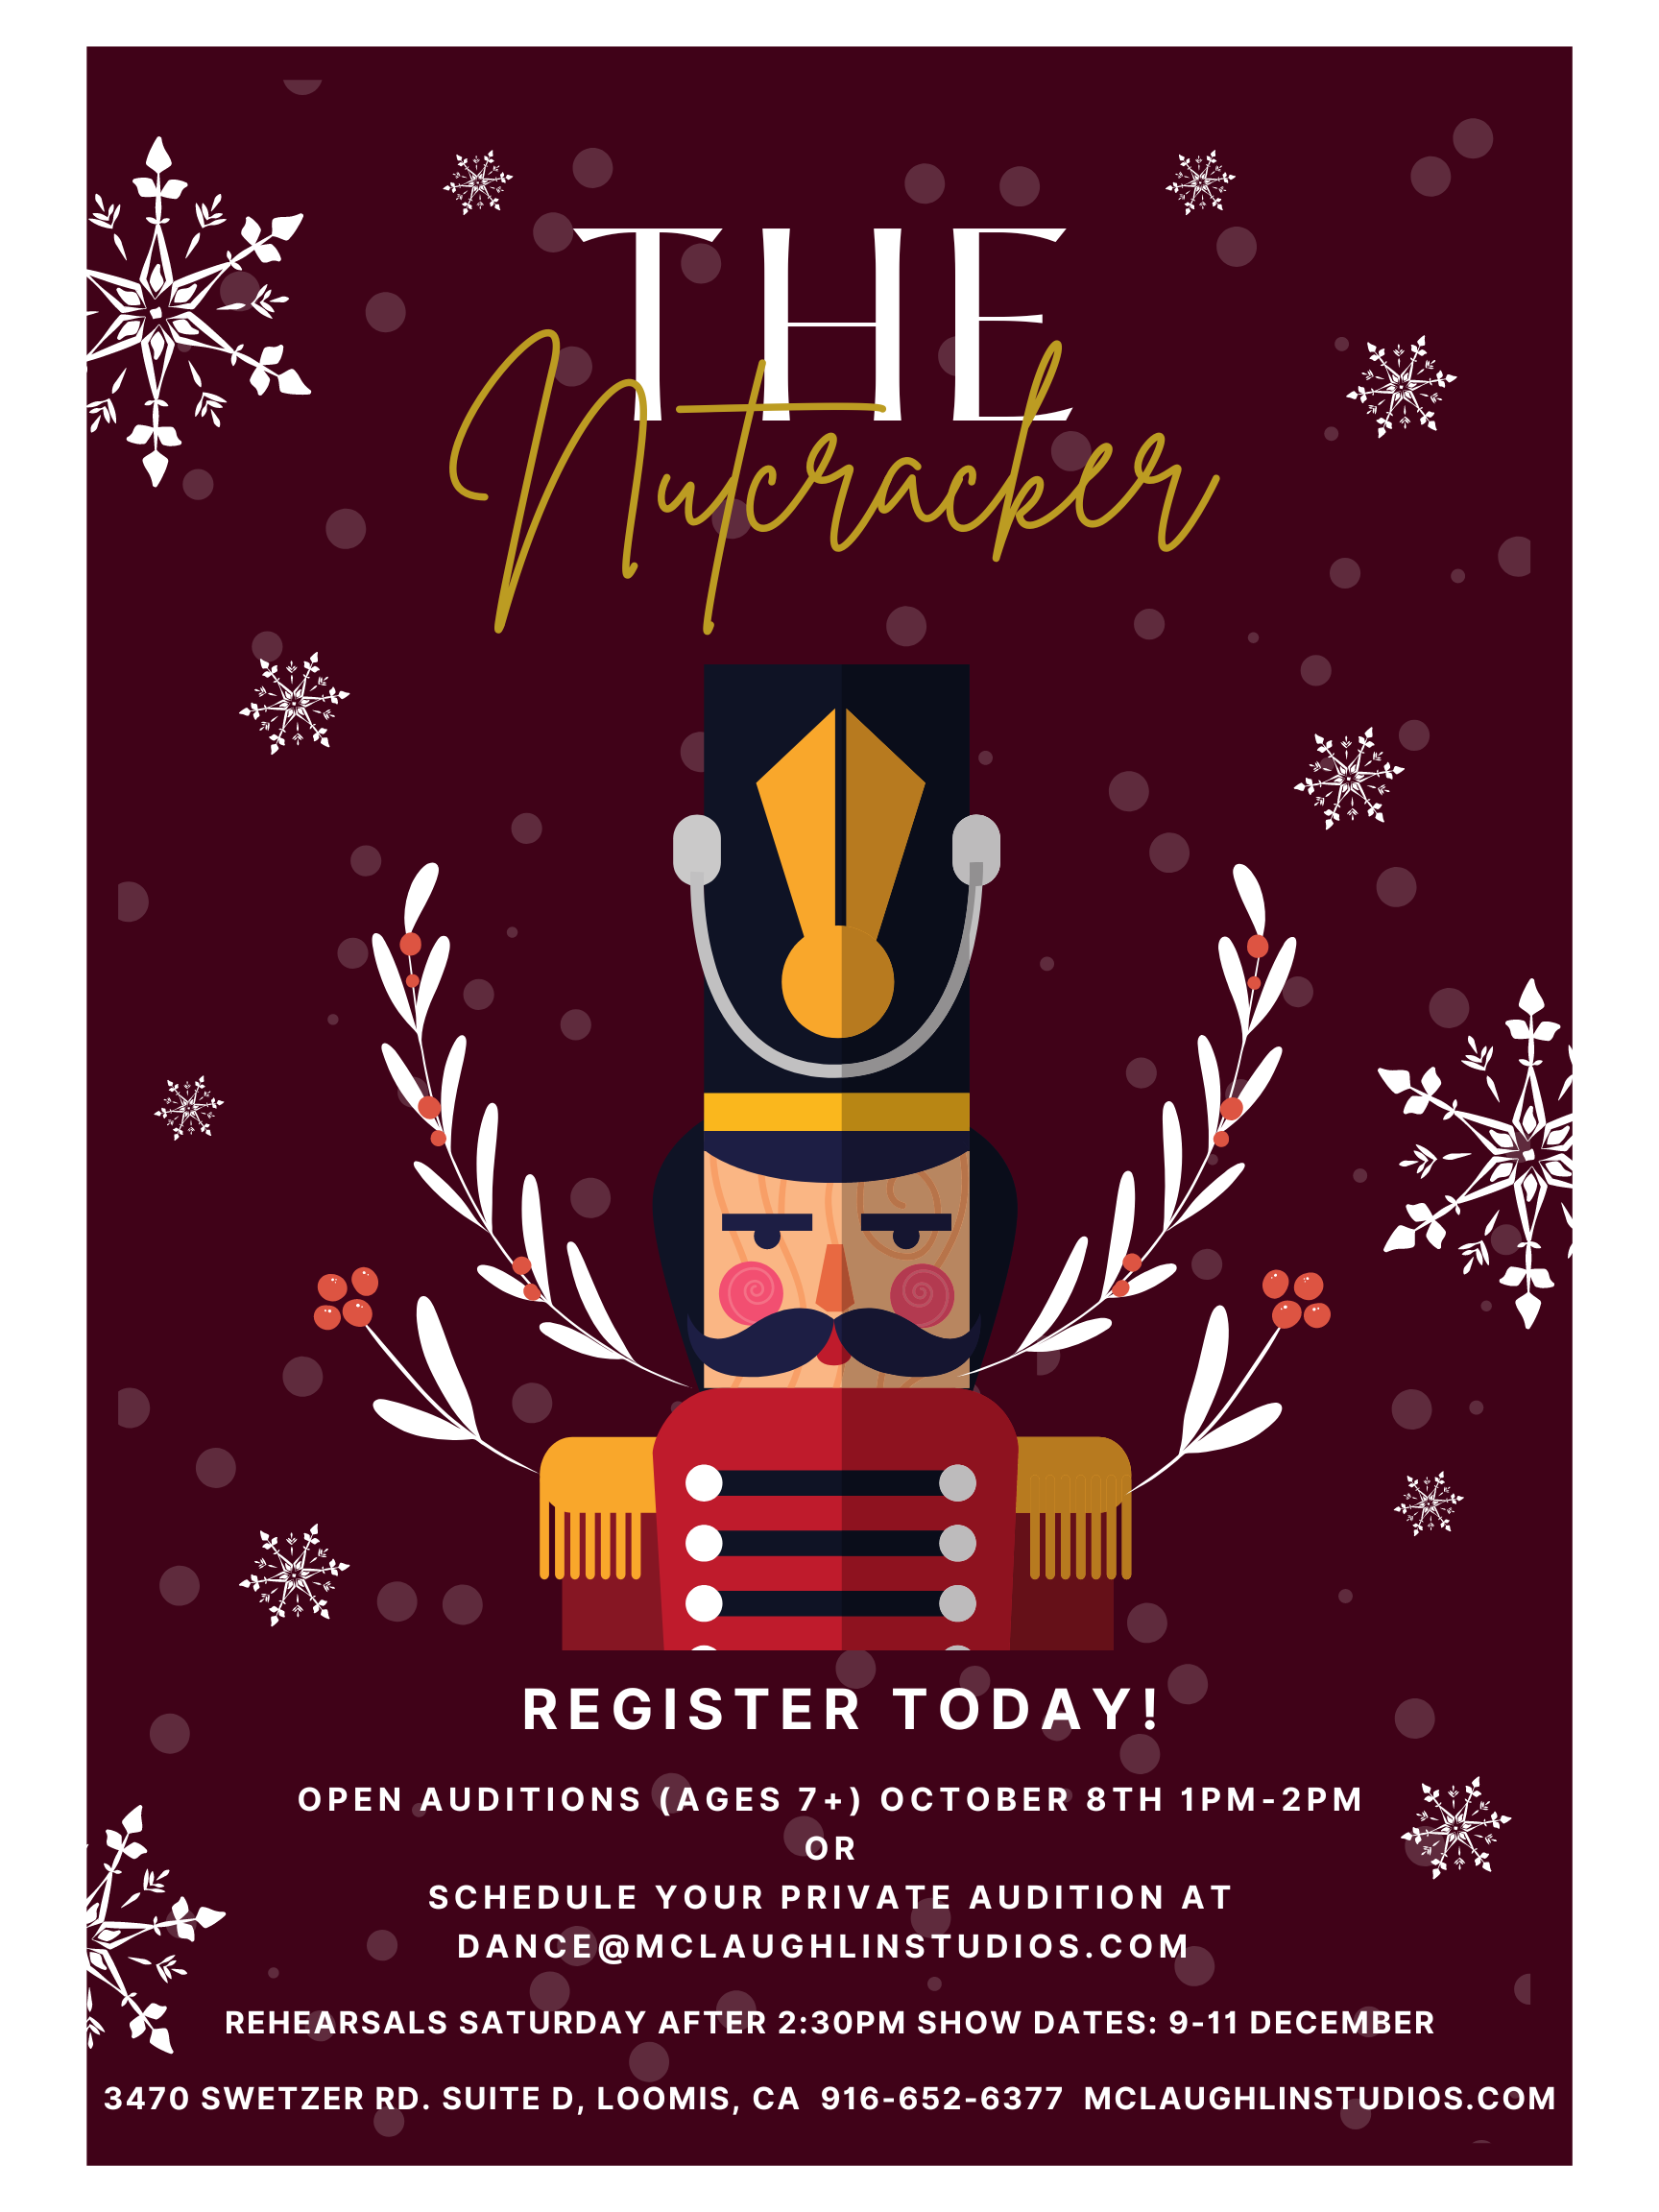 Big Nutcracker Oct Auditions Poster 18x24in